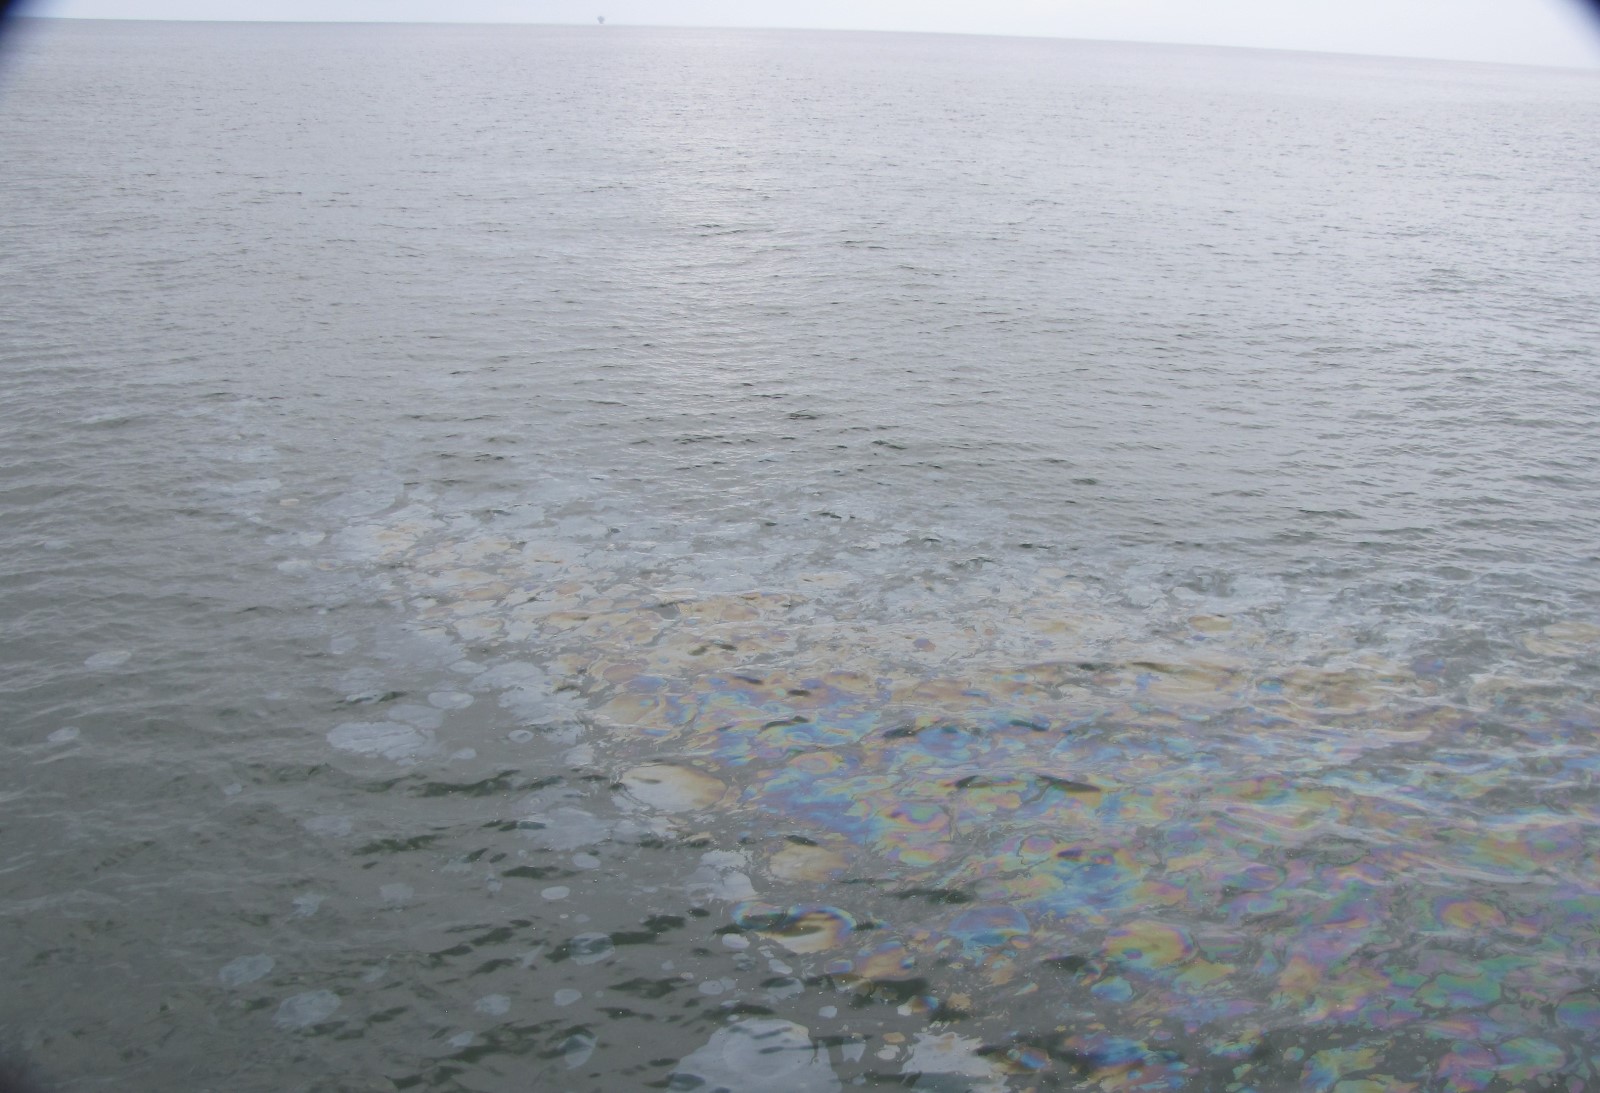 Oil can be seen rising to the surface at the origin of the slick emanating from the Taylor MC20 site. Credit: NOAA